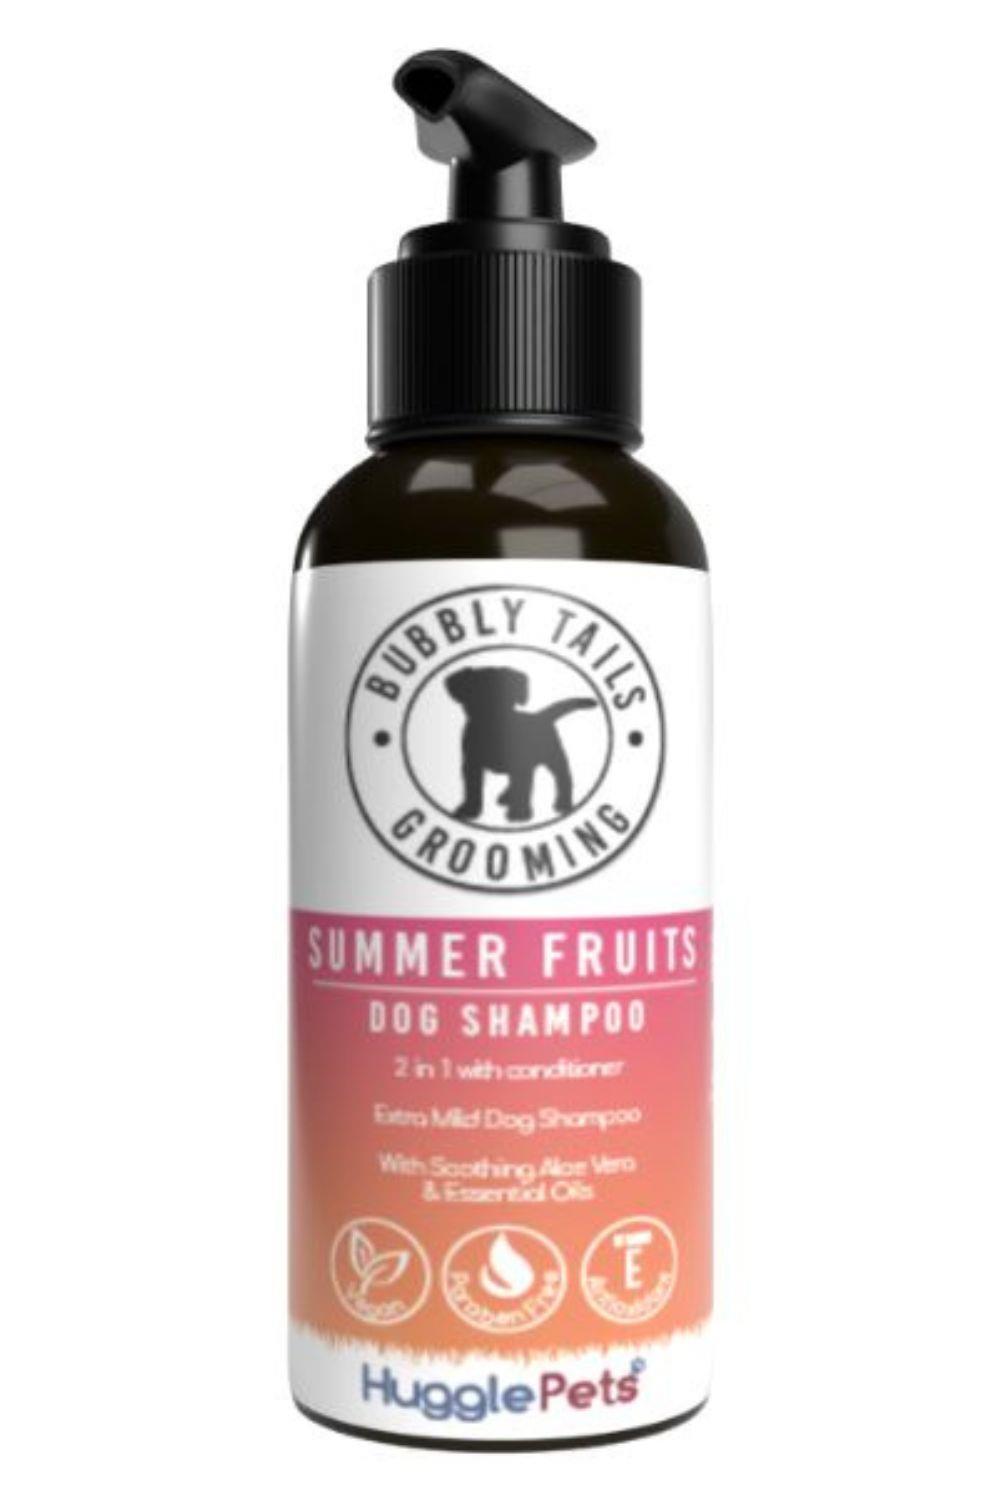 HugglePets Bubbly Tails Summer Fruits 2 in 1 Dog Shampoo 1/3